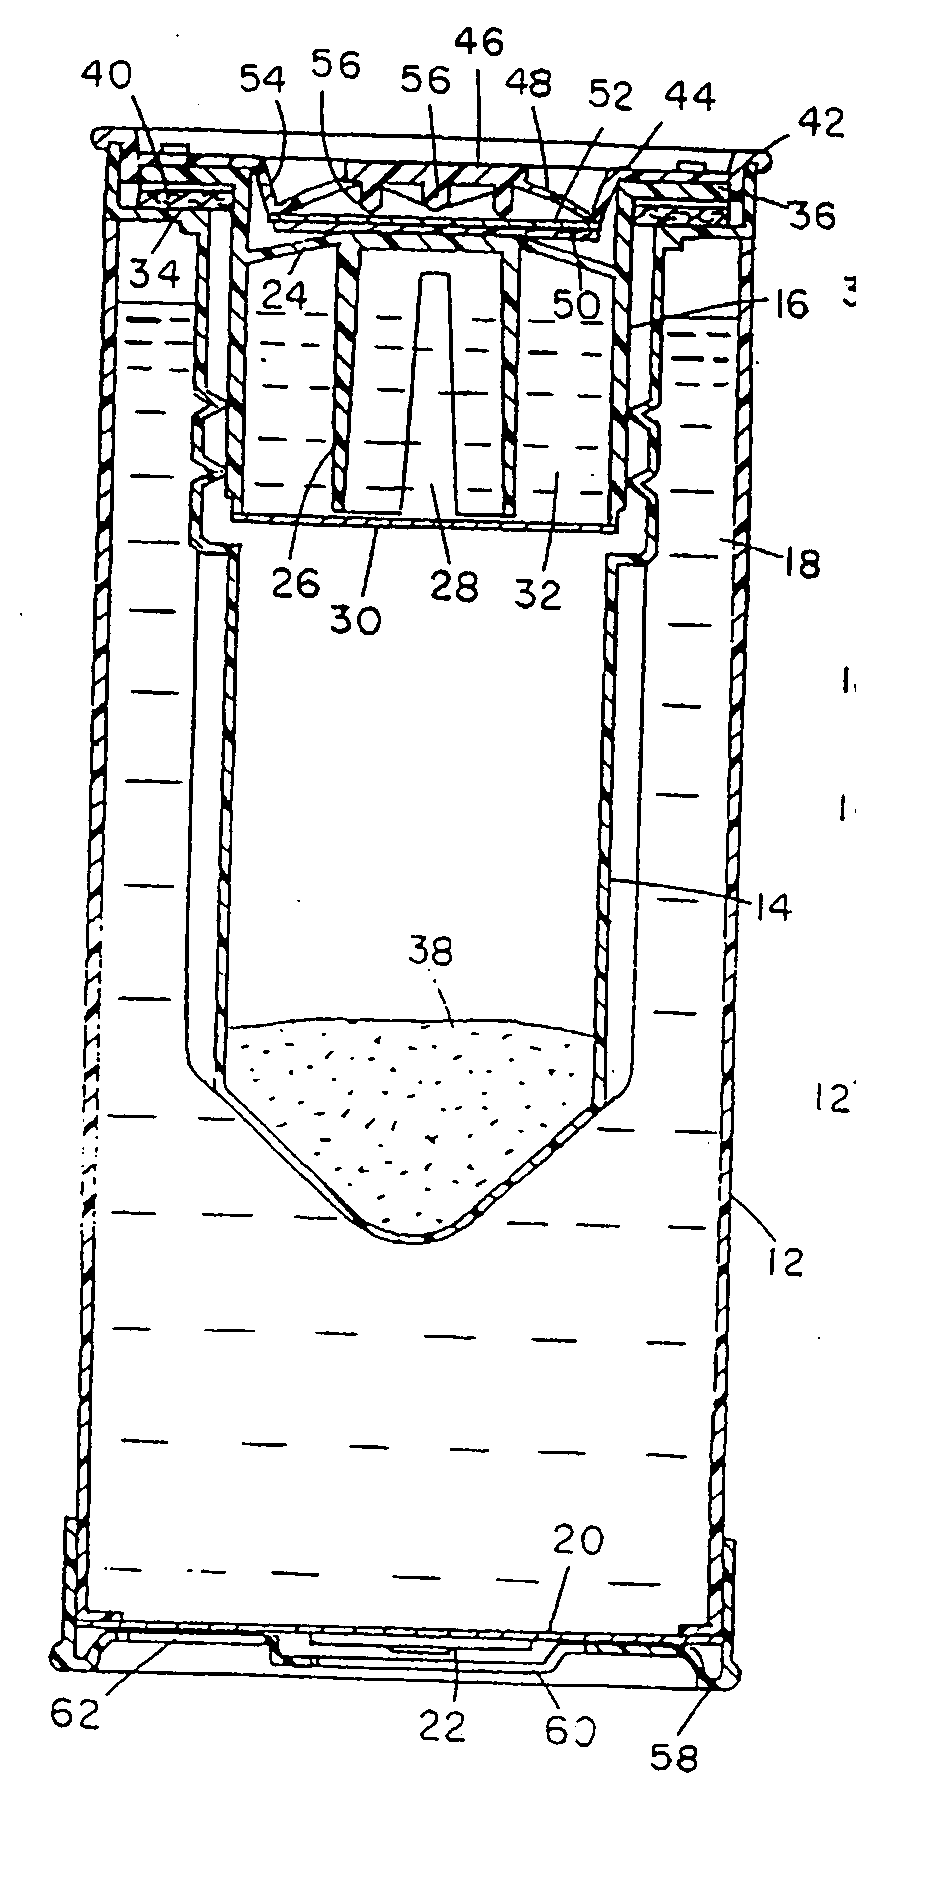 Container with integral module for heating or cooling the contents